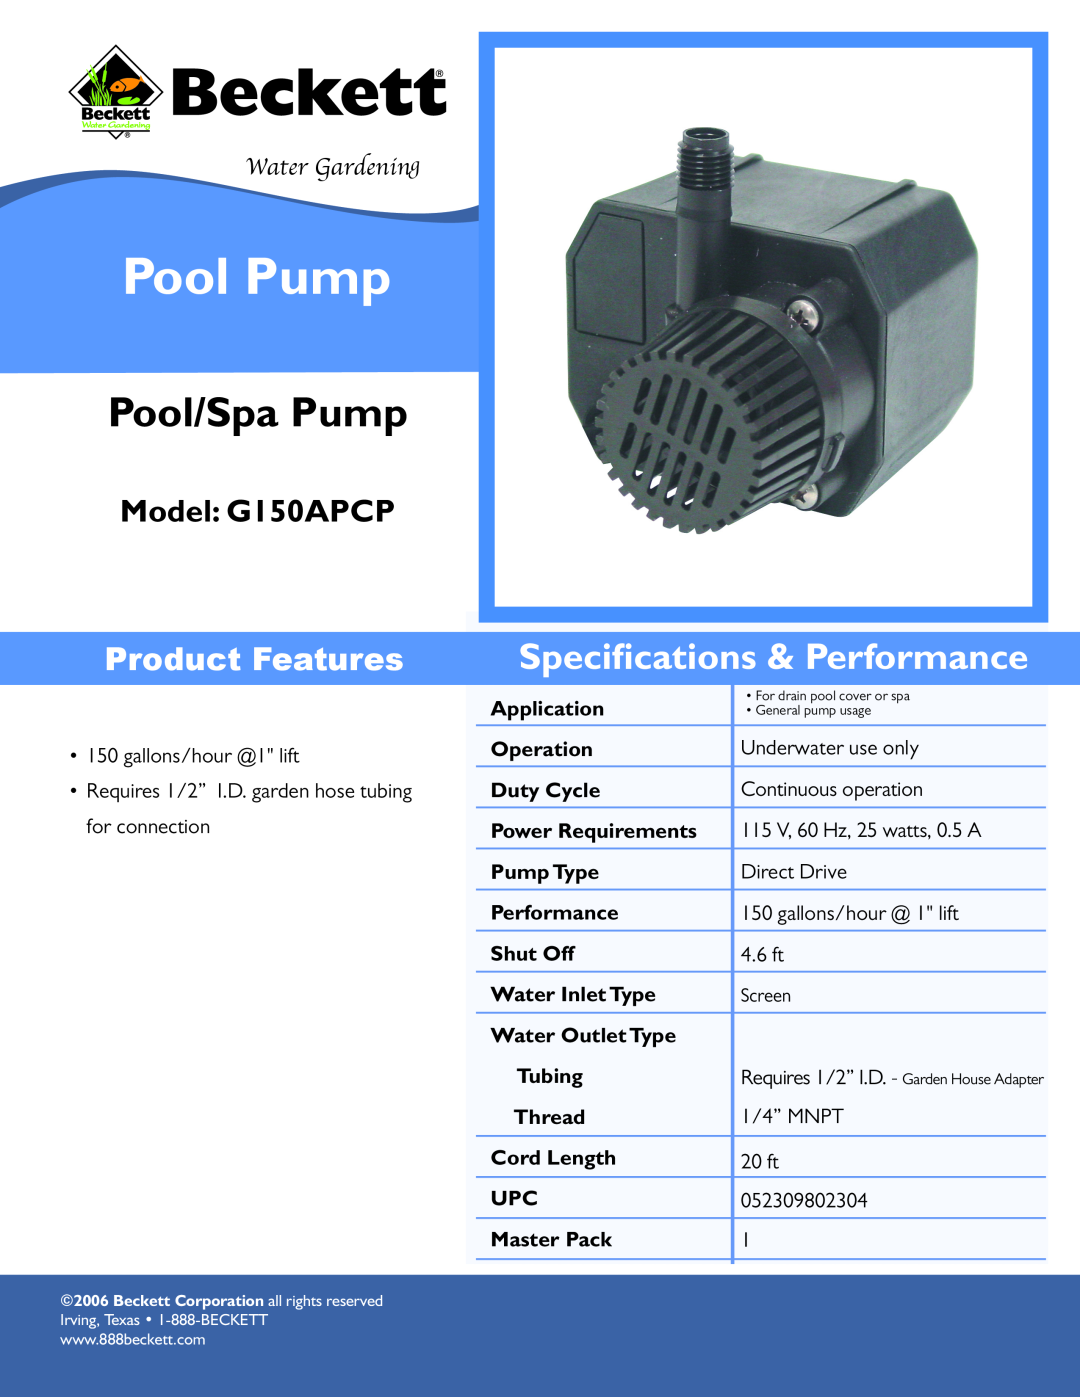 Beckett Water Gardening specifications Pool Pump, Pool/Spa Pump, Speciﬁcations & Performance, Model G150APCP 